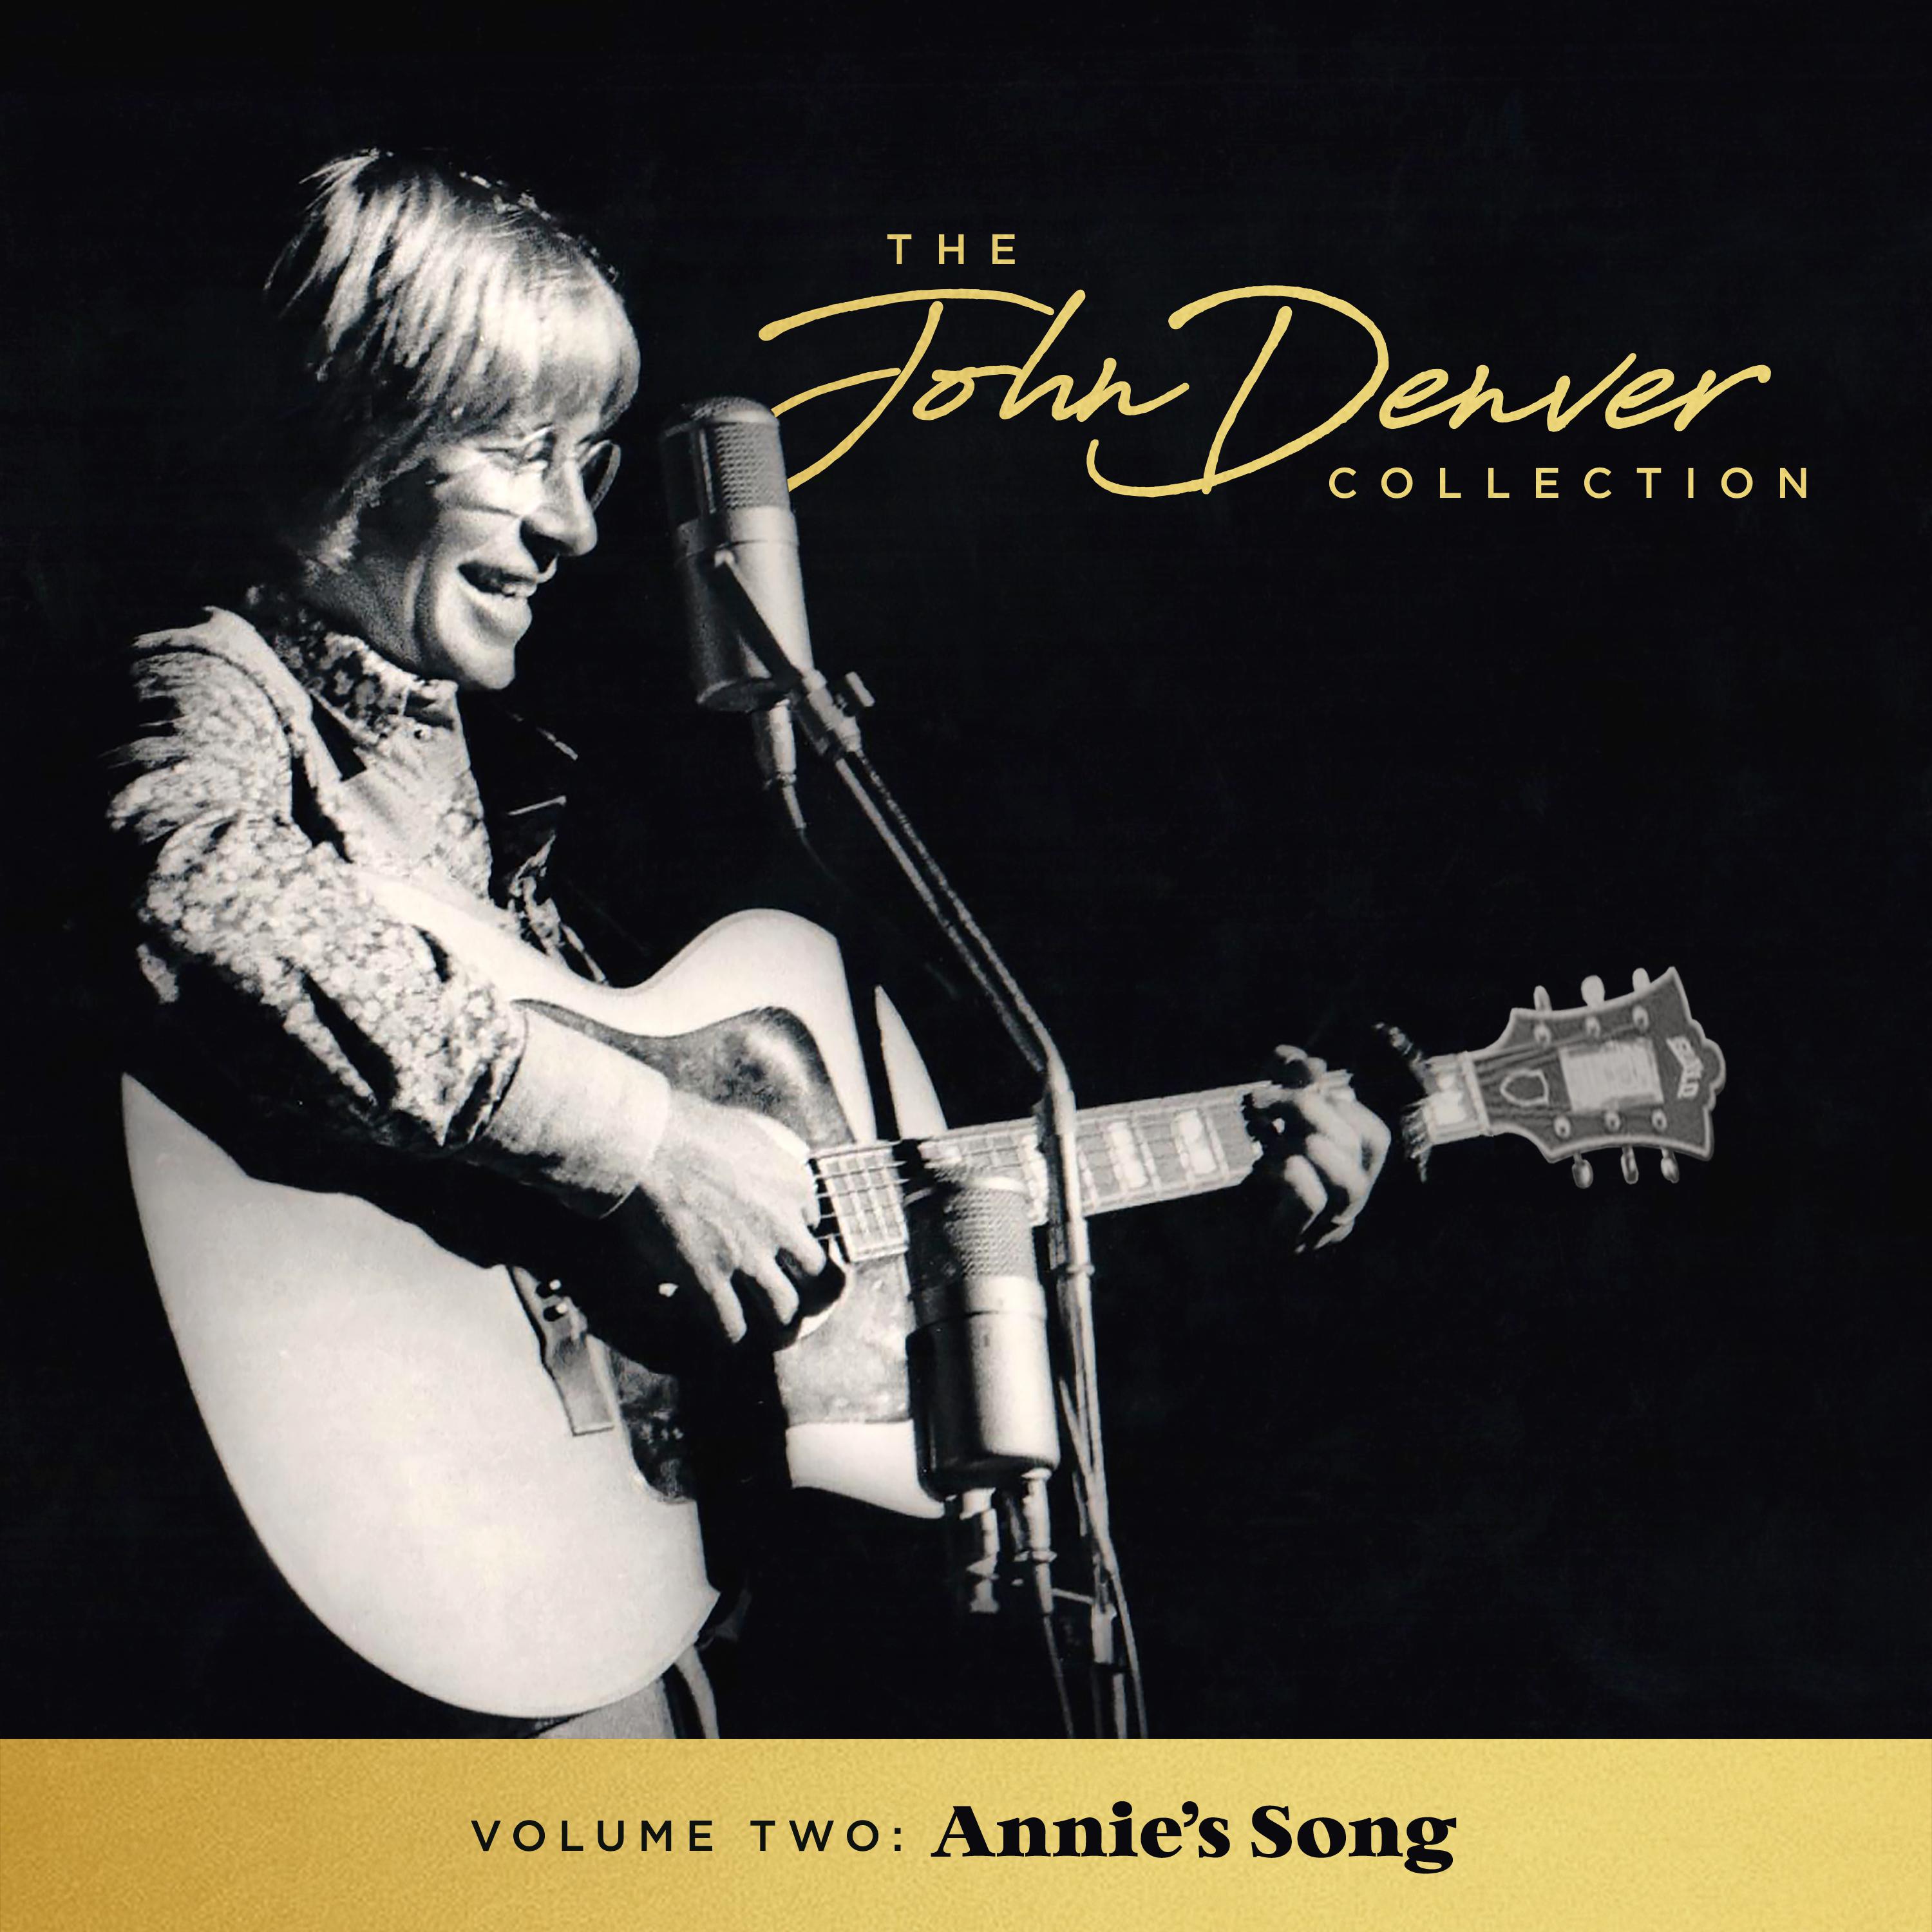 The John Denver Collection, Vol 2: Annie's Song